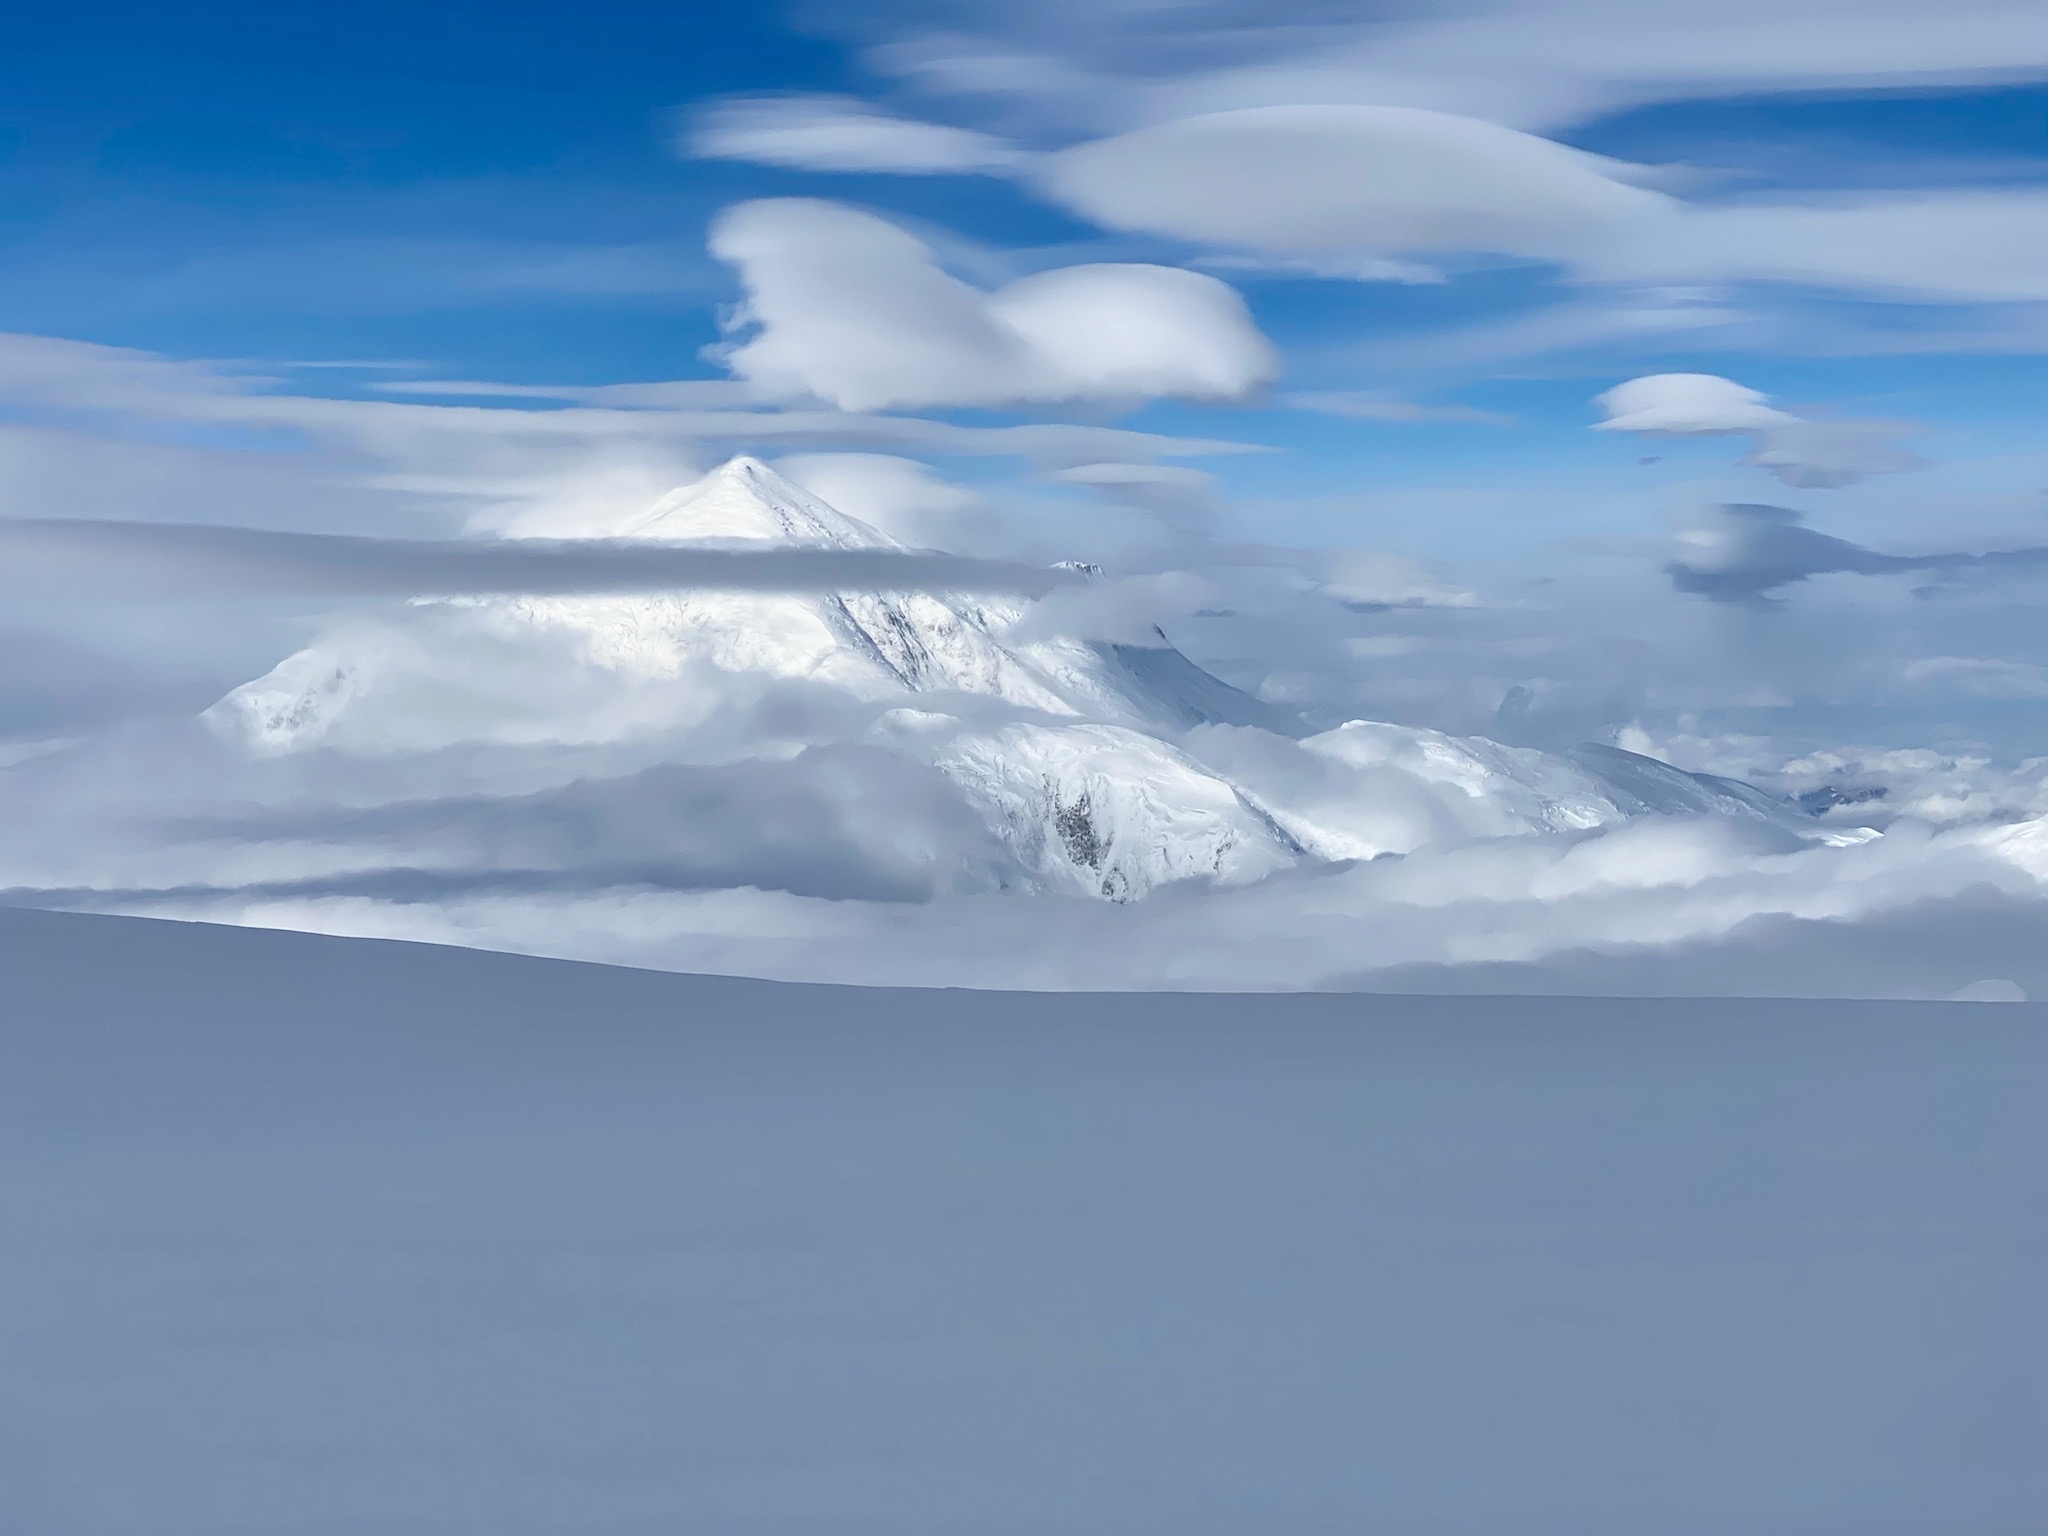 Mountain peak as seen through layers of lenticular clouds